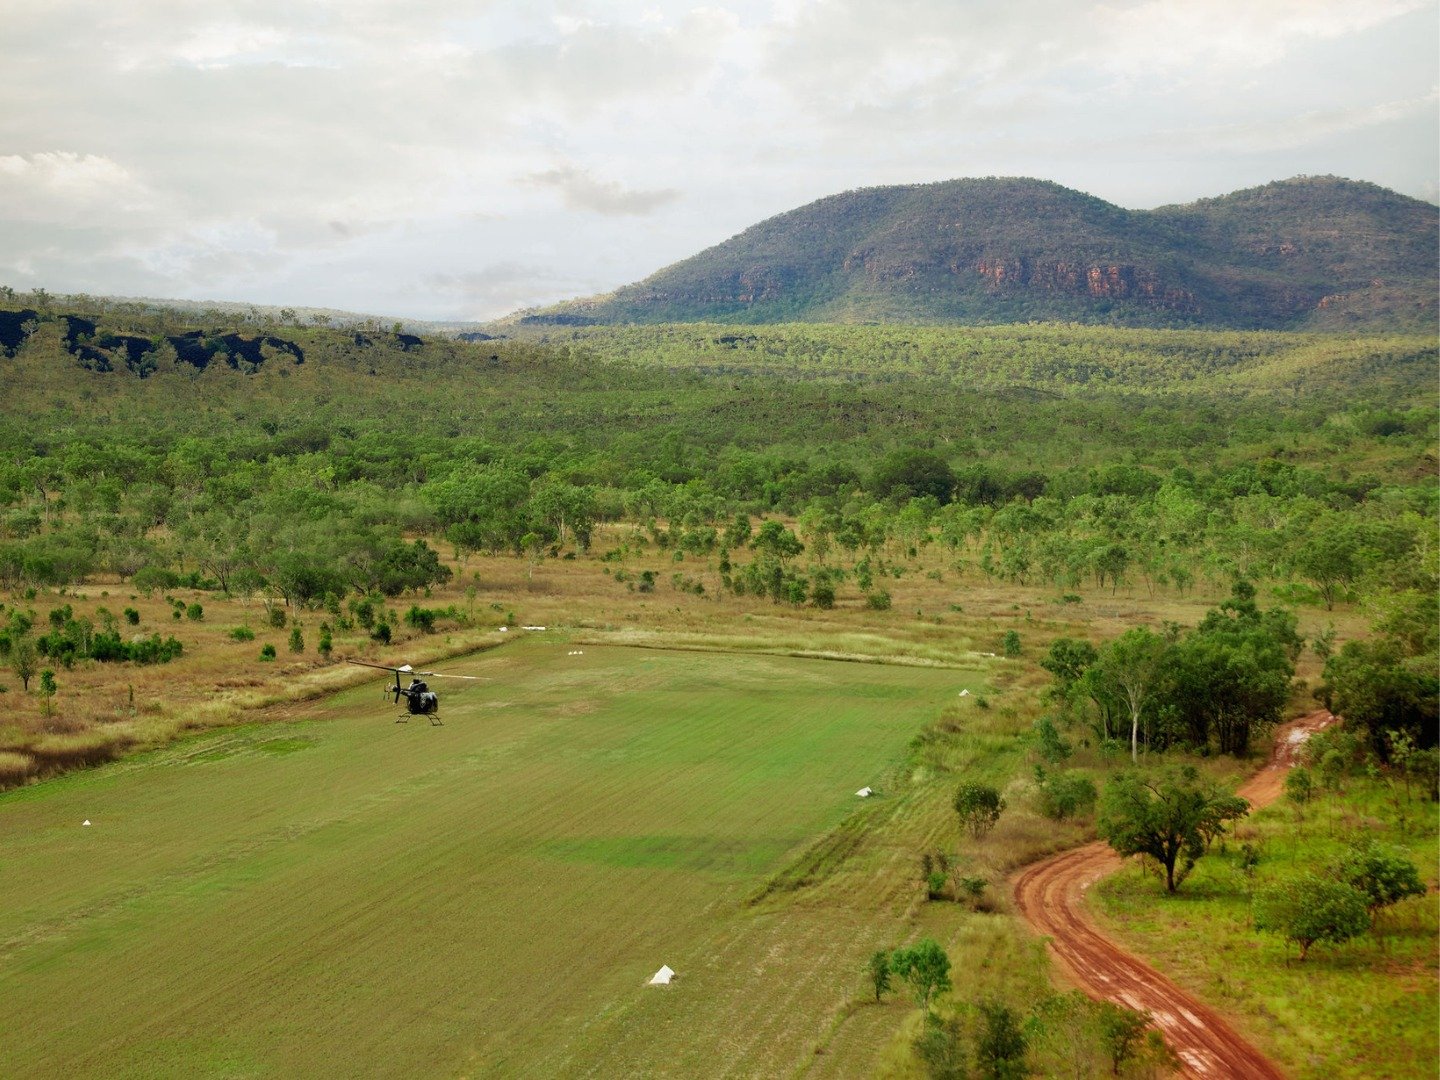 Heading off for another day full of scenic helicopter flights 🚁

Departing from Mount Hart, our scenic flights have been a hit with guests seeking a new perspective on their Kimberley adventures. Whether you're taking a break from 4WD exploration or